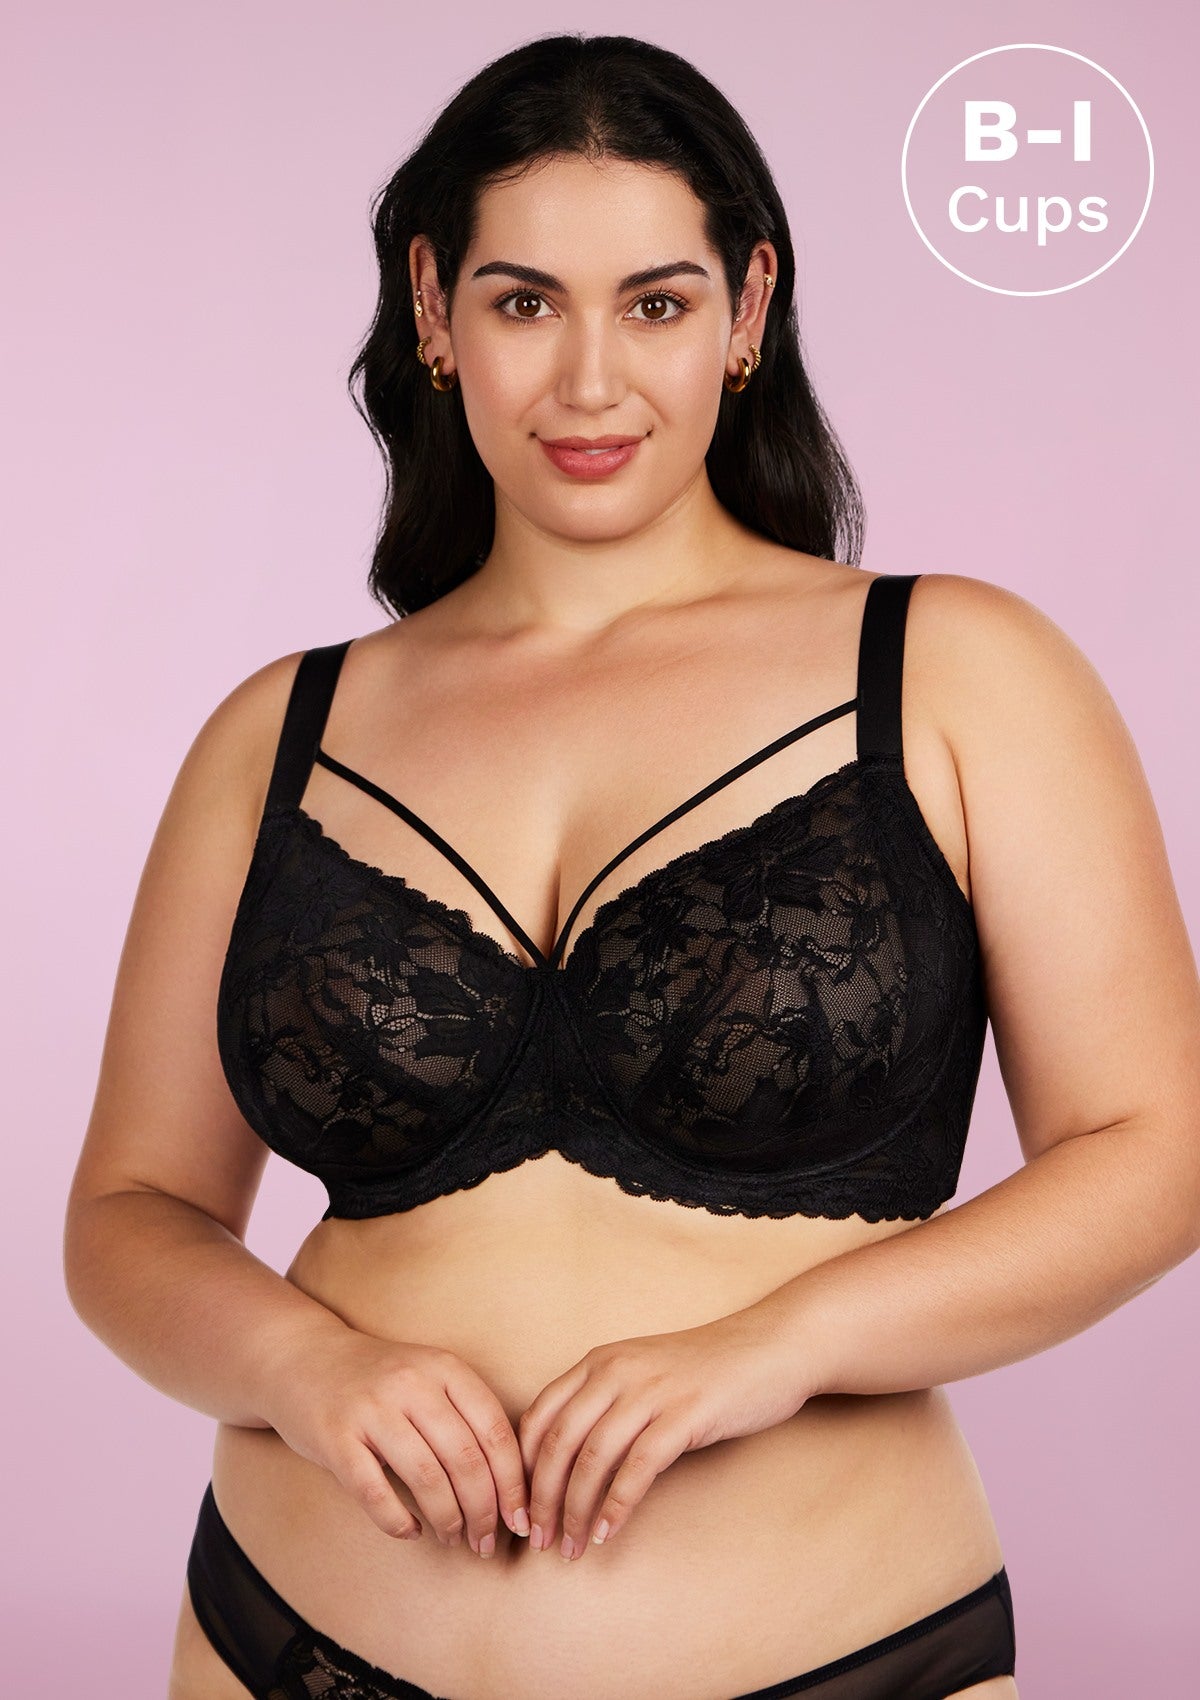 HSIA Pretty In Petals Lace Bra And Panty Set: Non Padded Wired Bra - Black / 40 / H